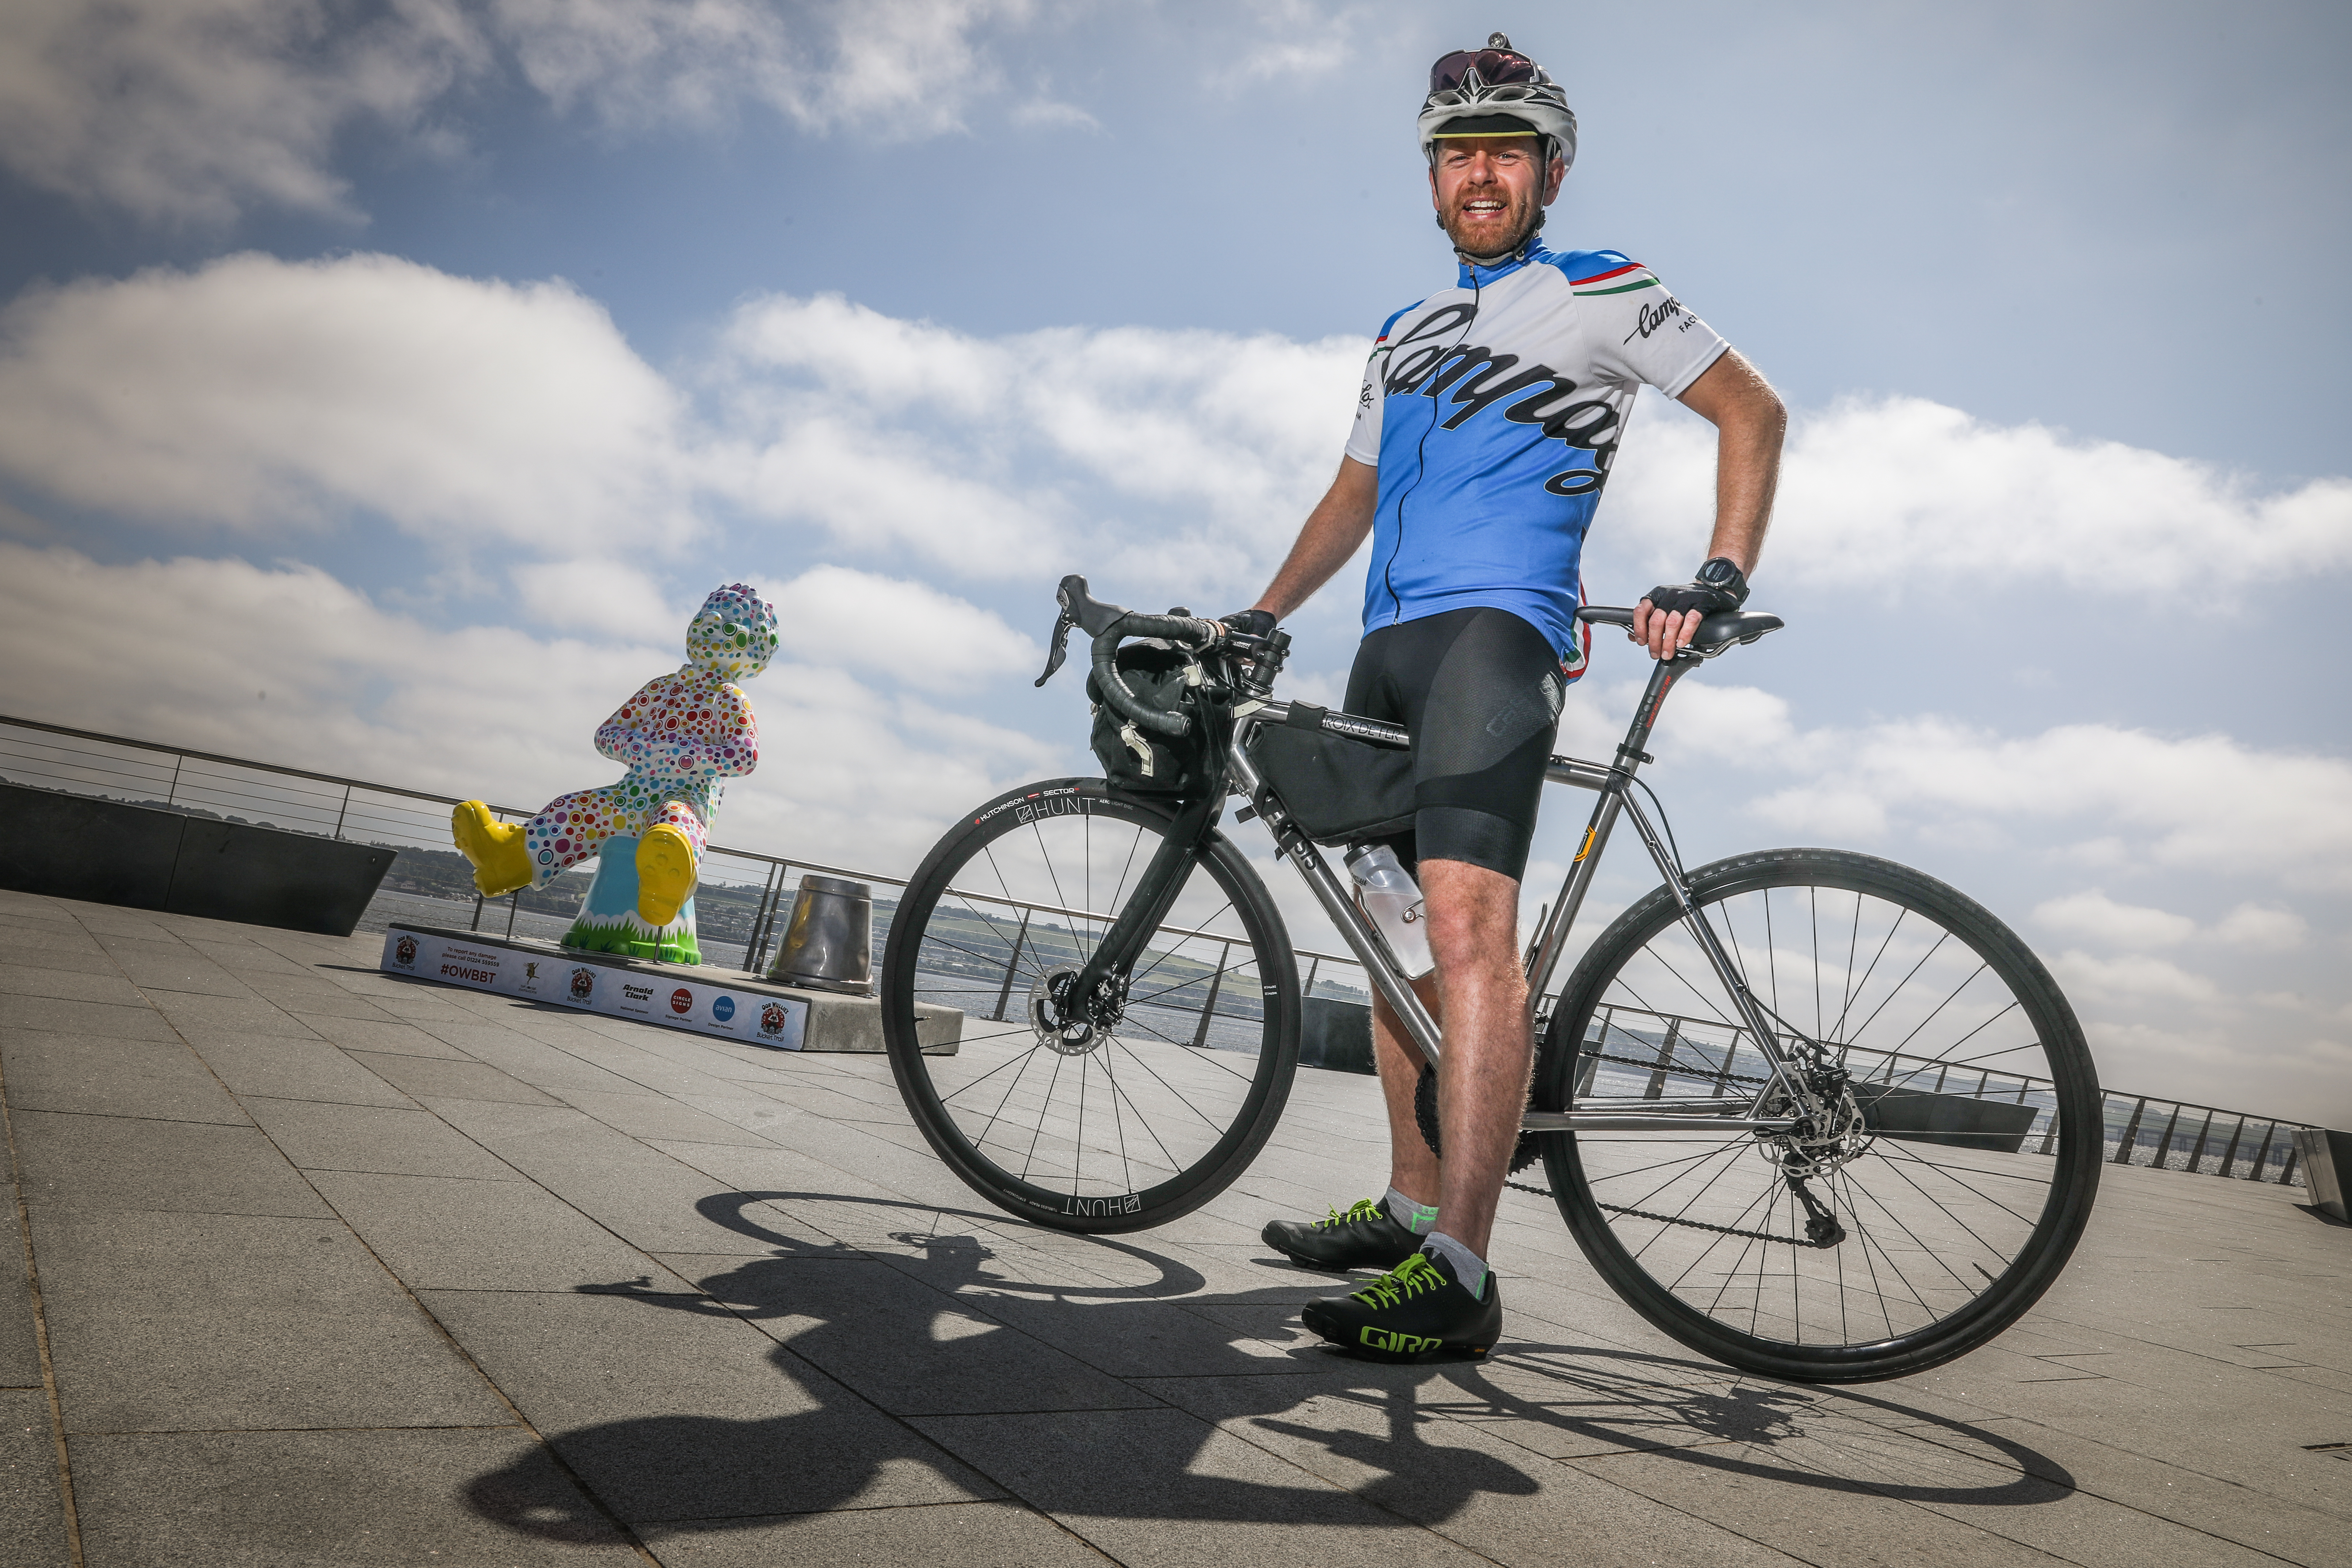 Mike Rennie is one of a group from NCR Dundee who have decided to take part in a major cycling challenge to raise funds for The Archie Foundation